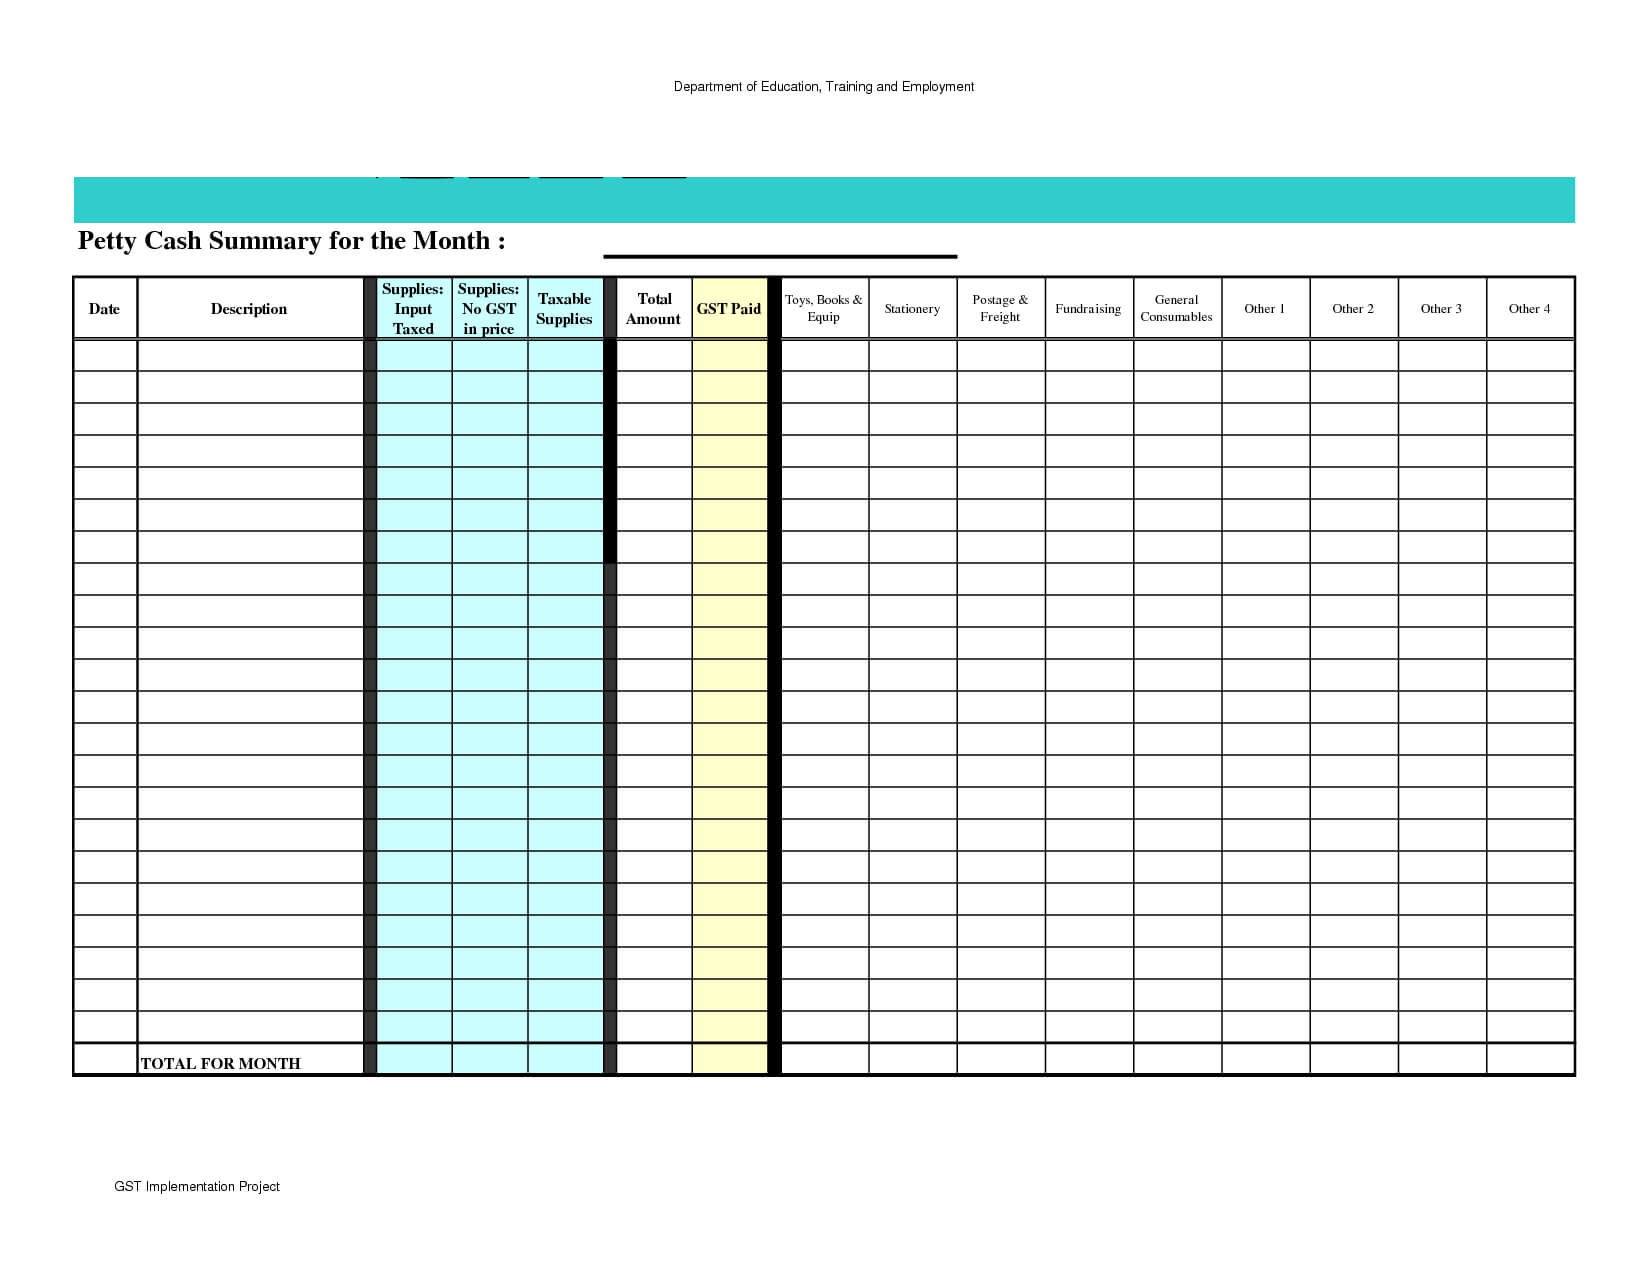 Petty Cash Spreadsheet Template Excel | Petty Cash Expences Throughout Expense Report Spreadsheet Template Excel